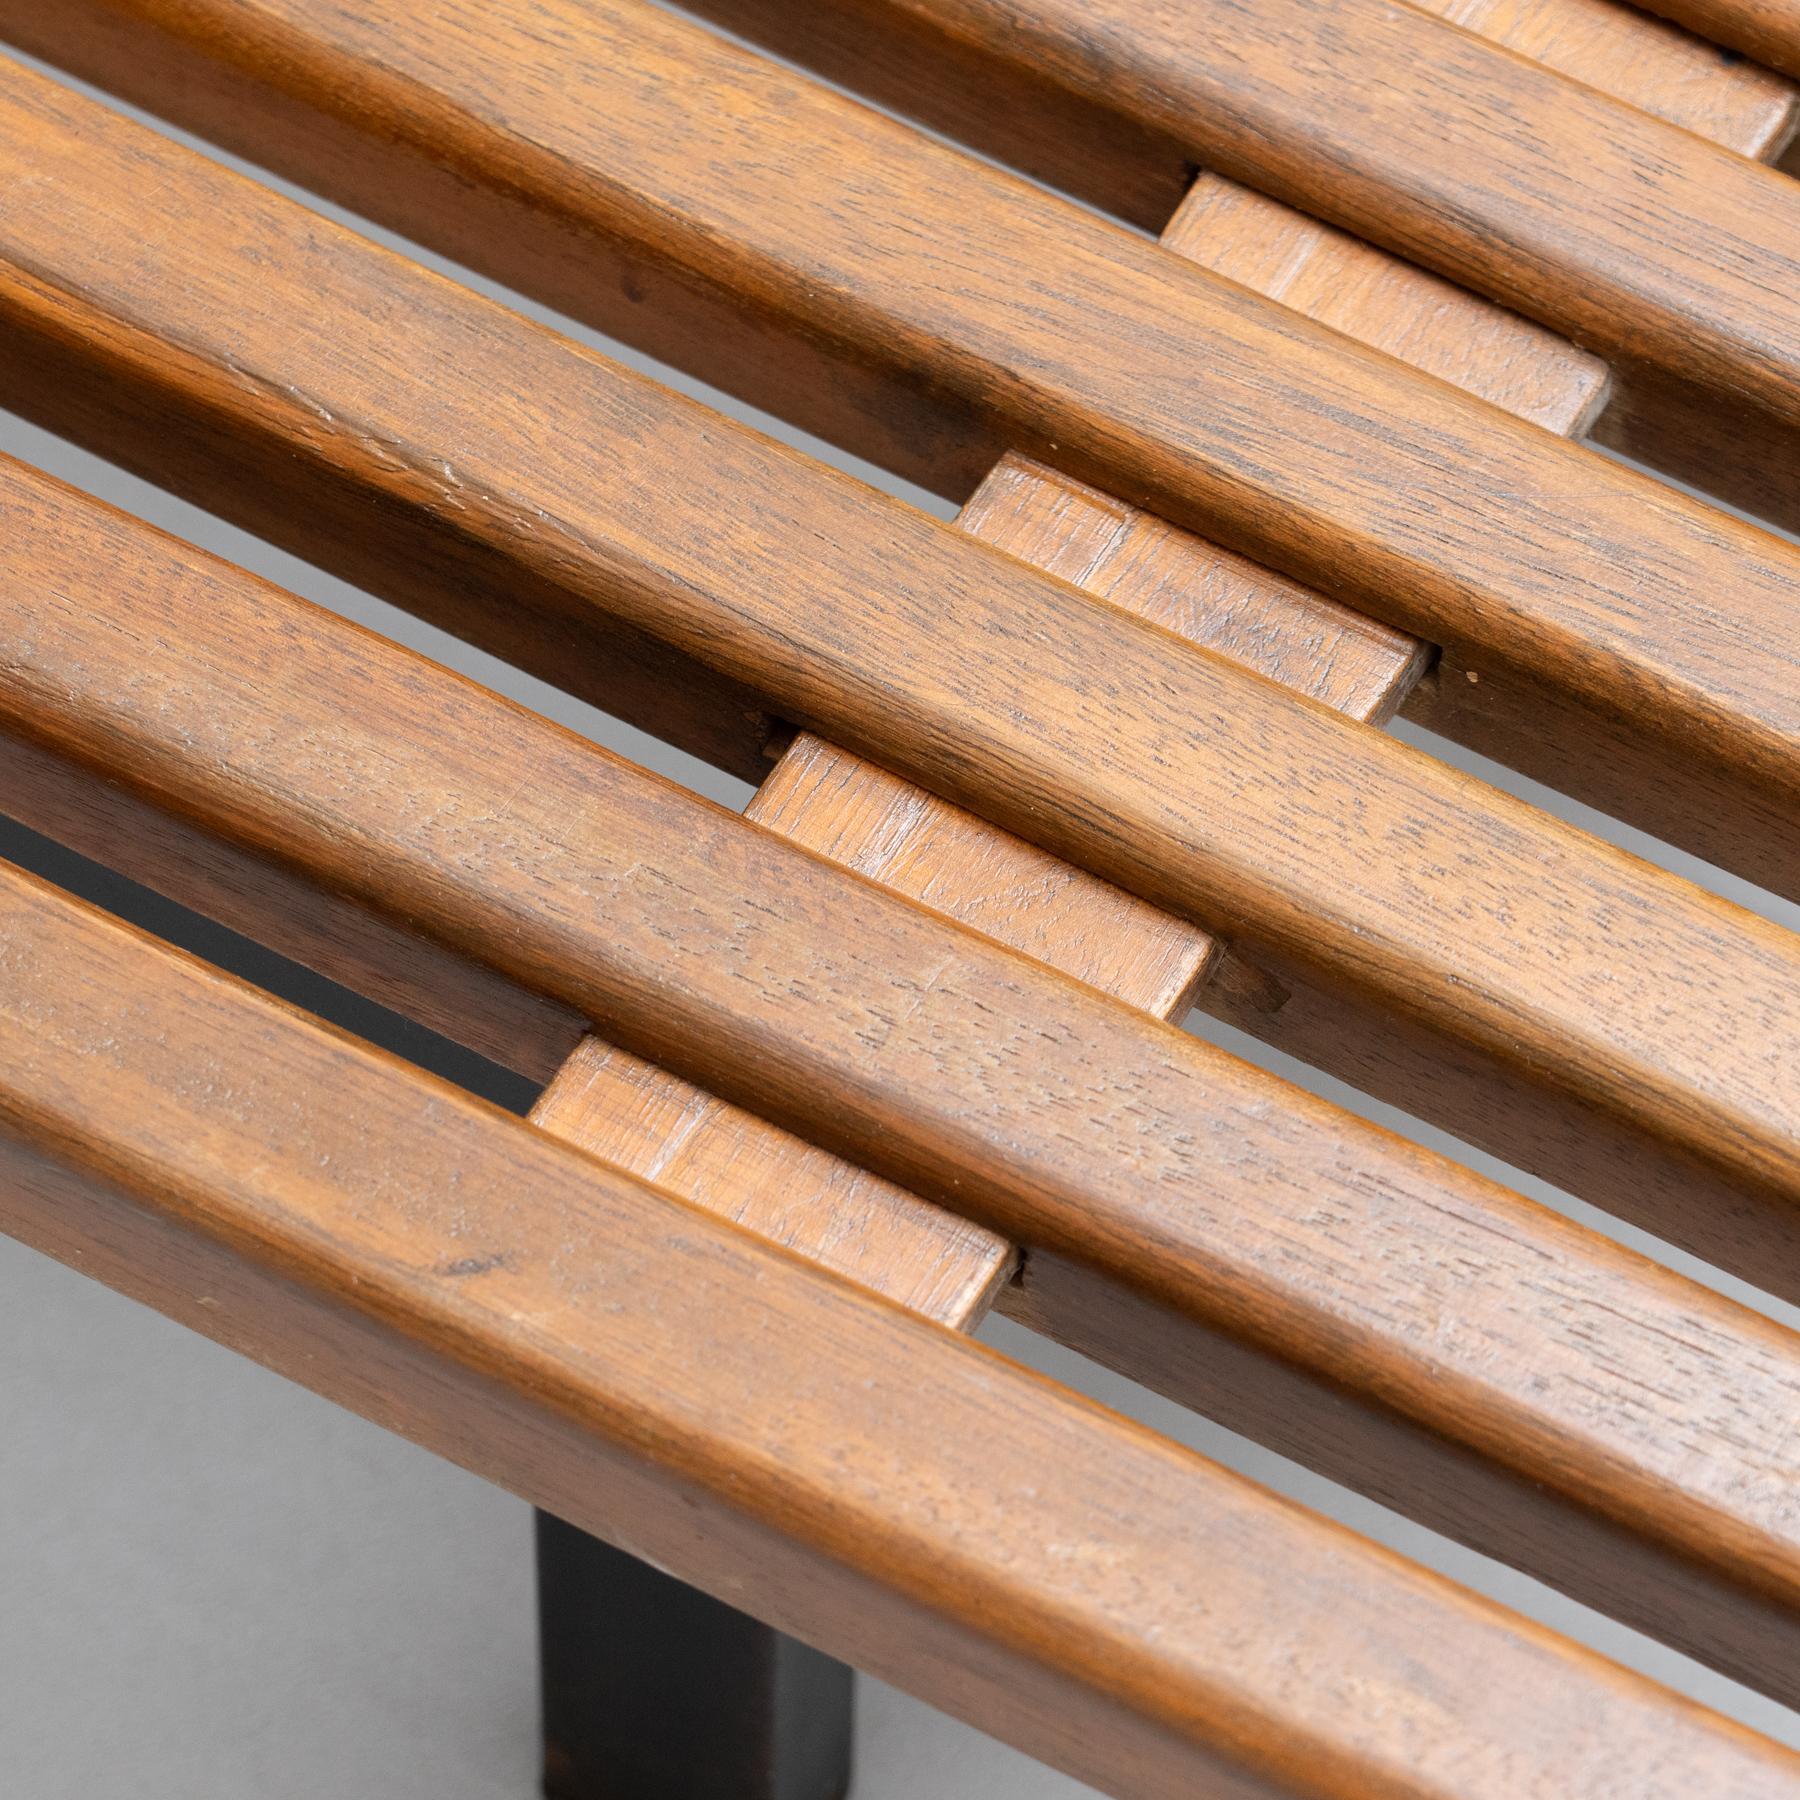 Wood Charlotte Perriand Cansado Bench, circa 1950 For Sale